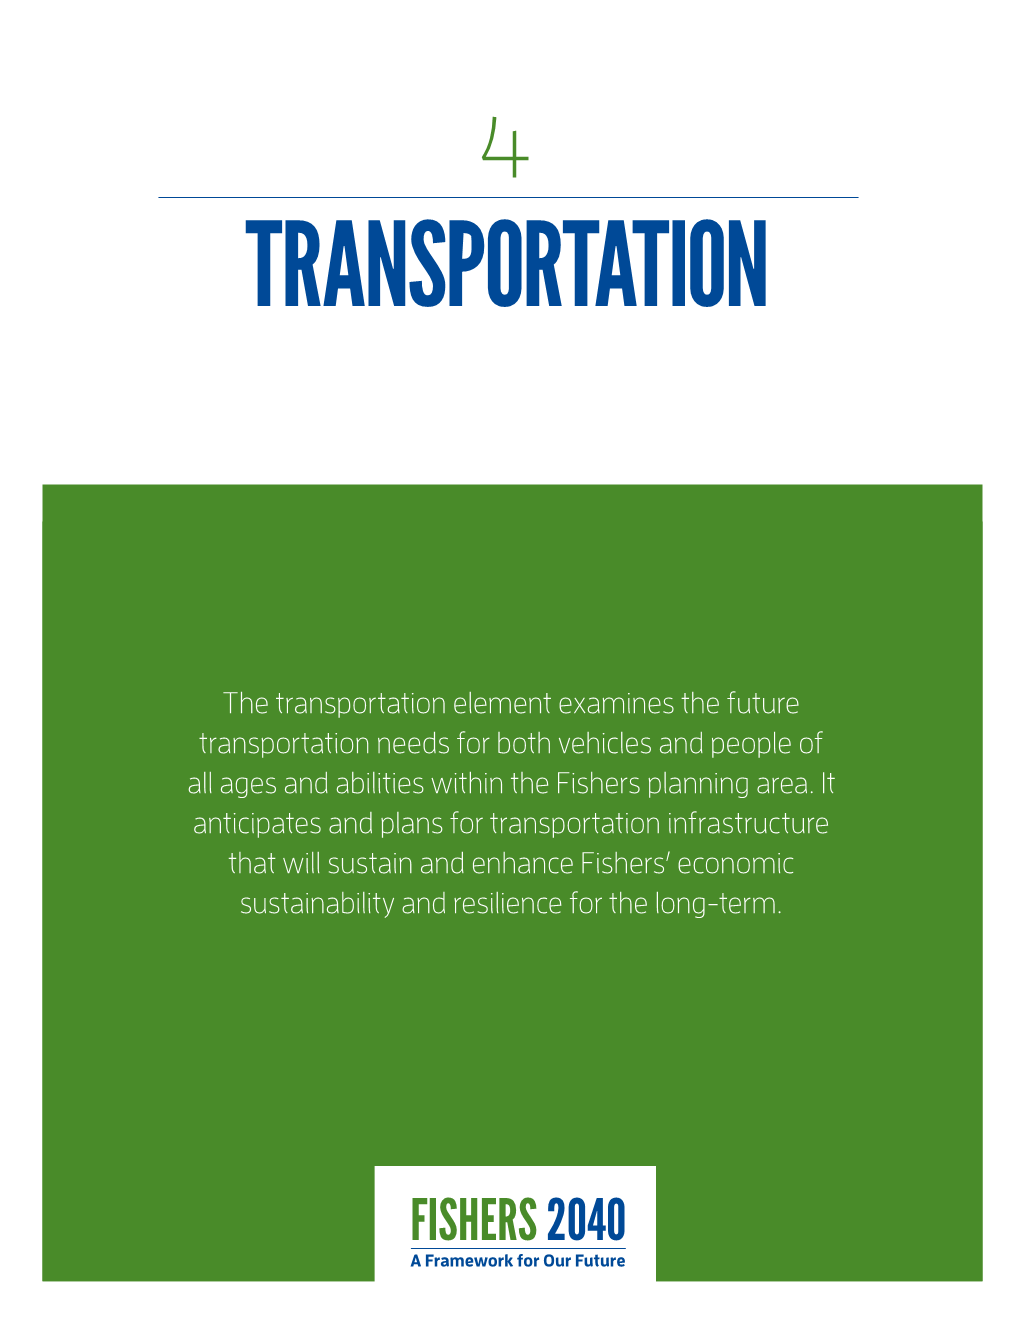 The Transportation Element Examines the Future Transportation Needs for Both Vehicles and People of All Ages and Abilities Within the Fishers Planning Area